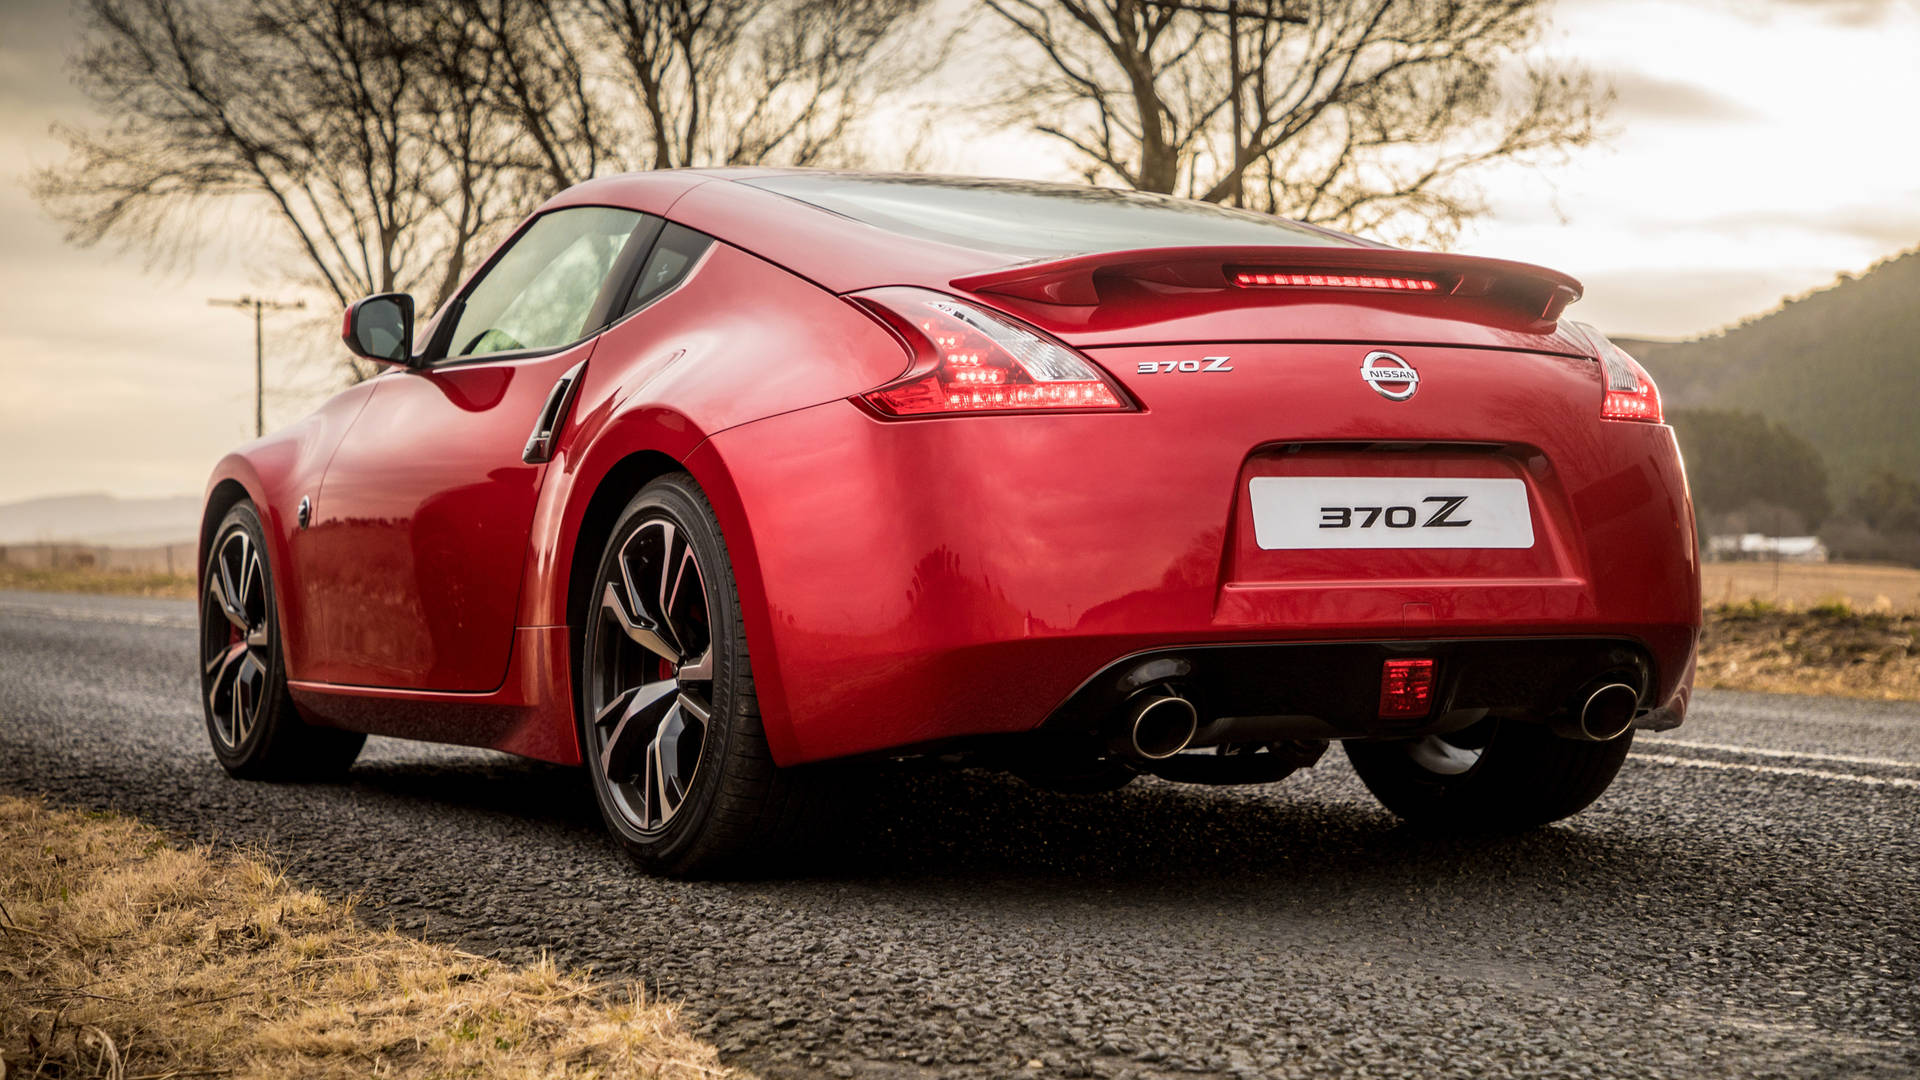 Get Ready to Hit the Road with the Nissan 370z Wallpaper